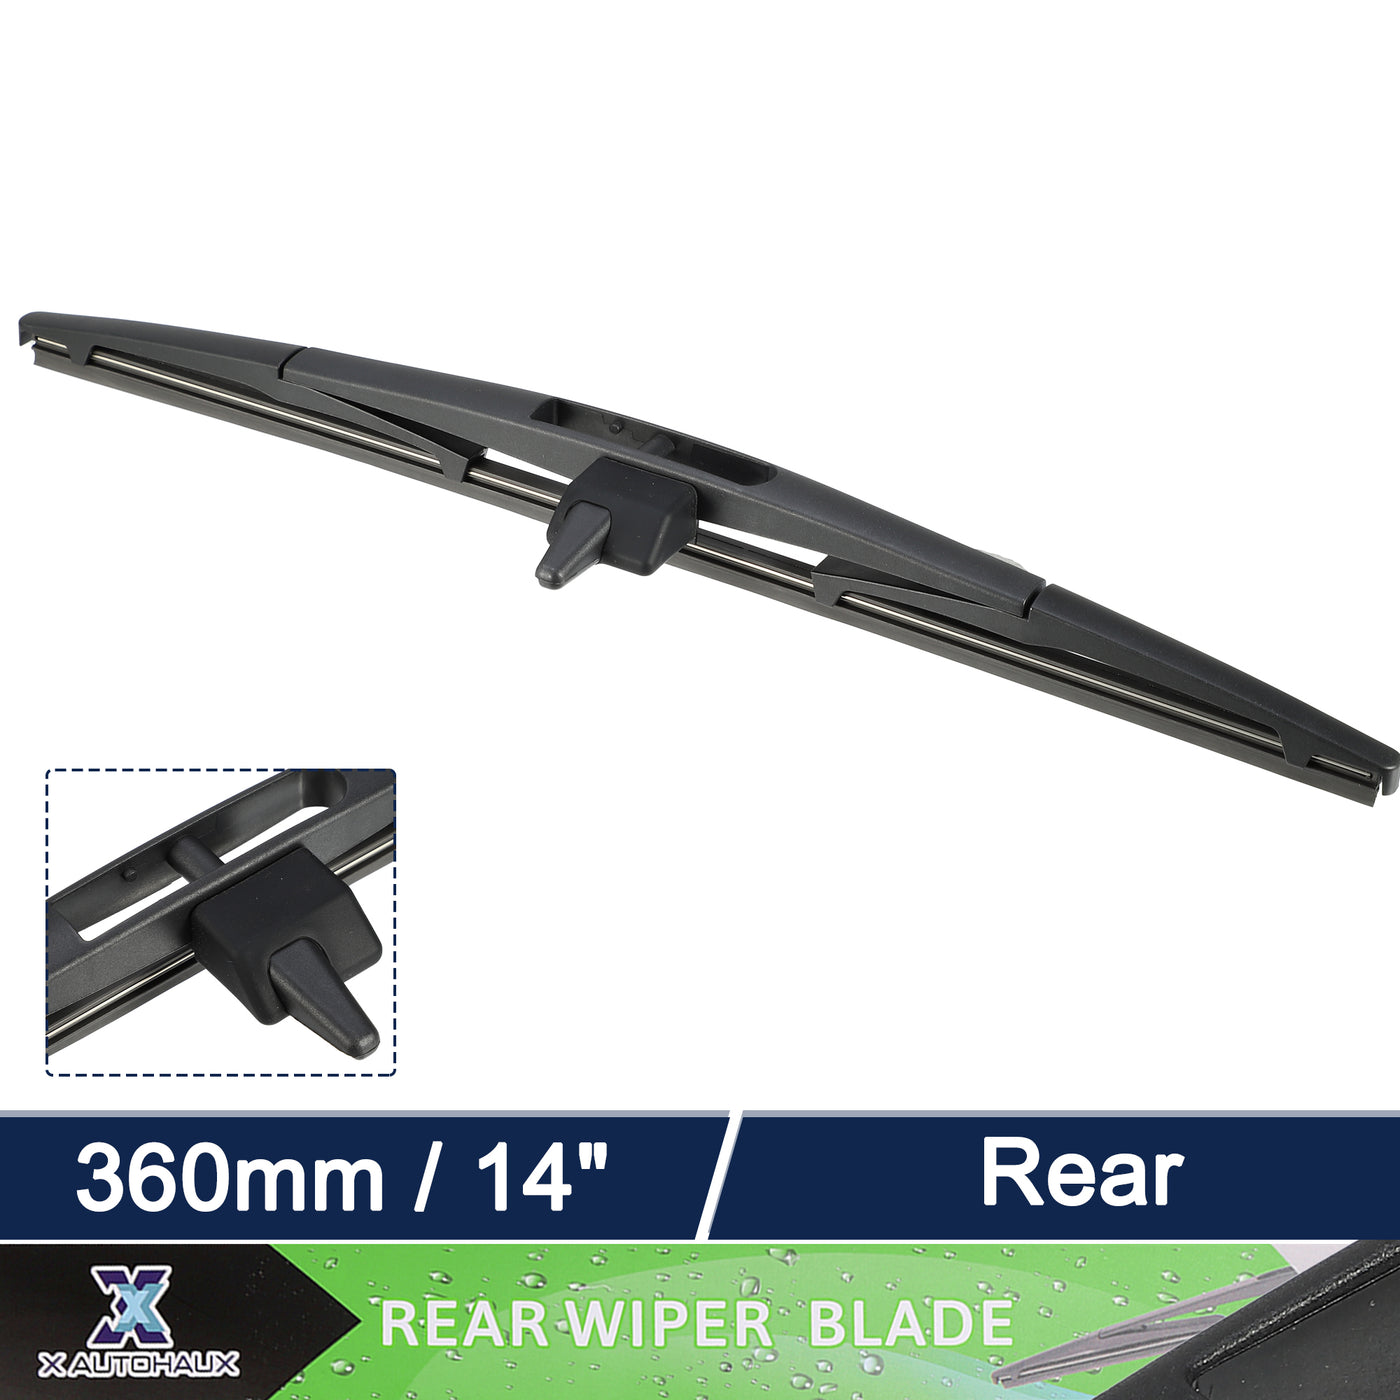 X AUTOHAUX Rear Windshield Wiper Blade Replacement for Honda Pilot 2009 2010 2011 2012 2013 2014 2015